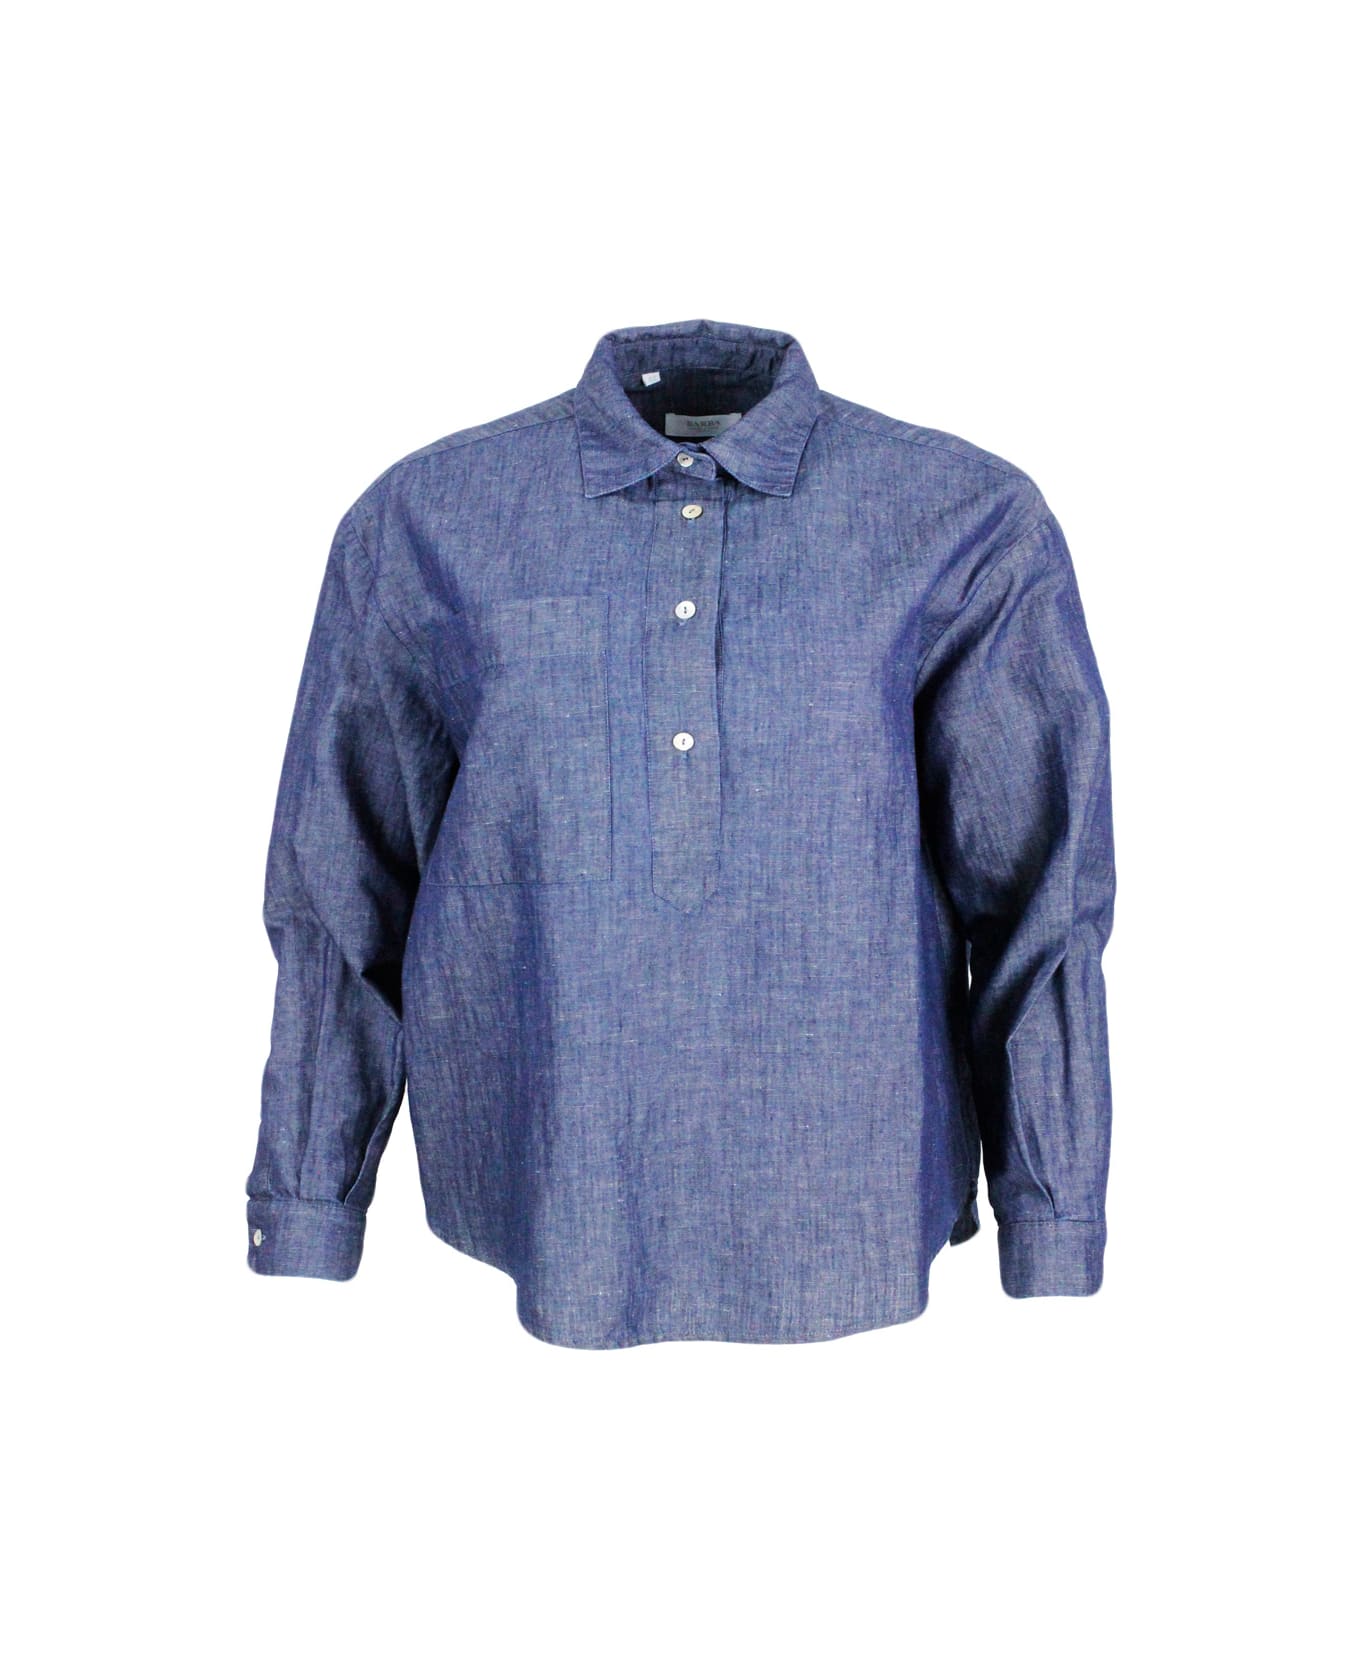 Barba Napoli Lightweight Denim-effect Pull-on Shirt In Linen Cotton With Four Buttons And Chest Pocket - Denim シャツ